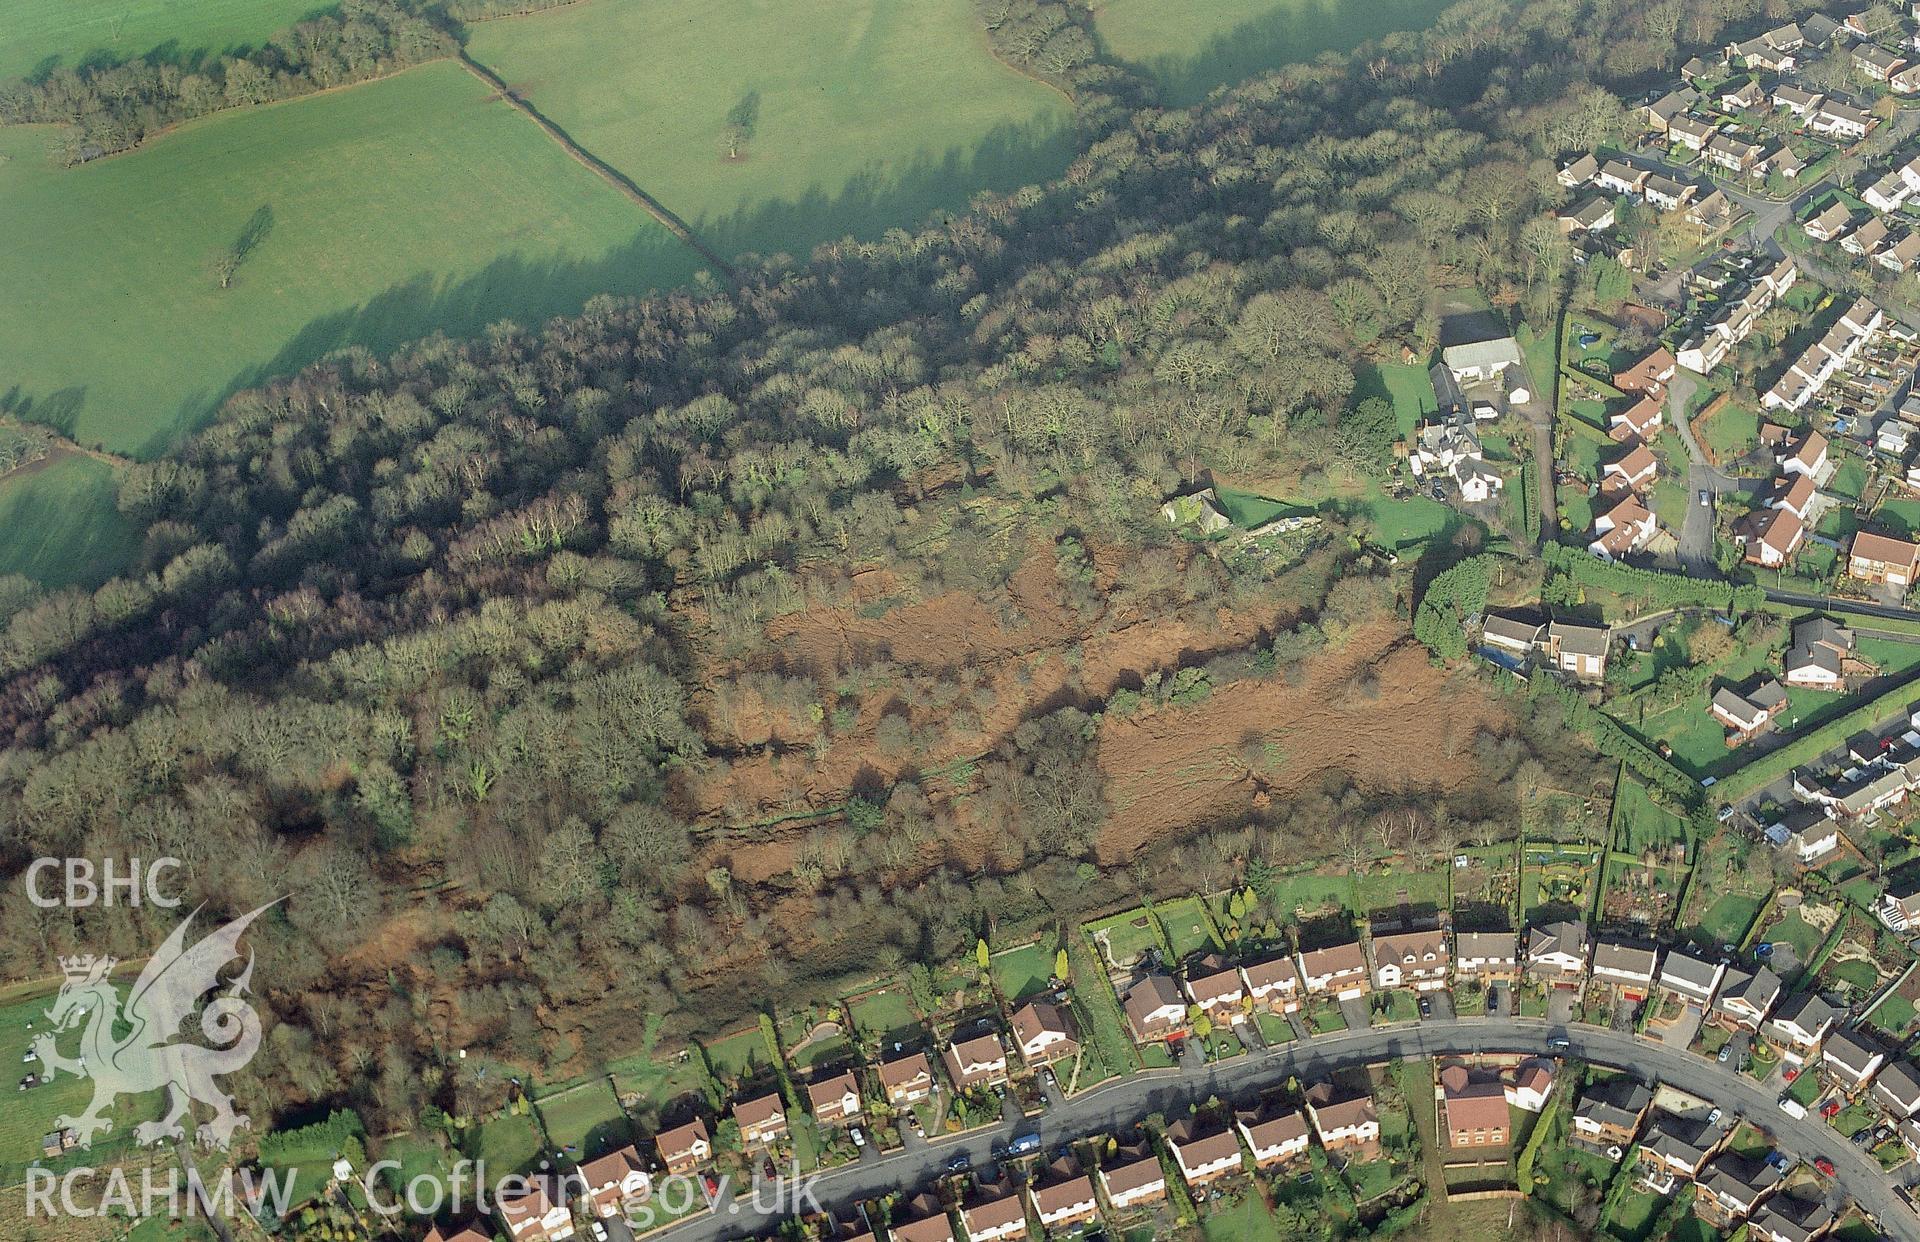 Slide of RCAHMW colour oblique aerial photograph of Lodge Wood Camp, taken by T.G. Driver, 2005.